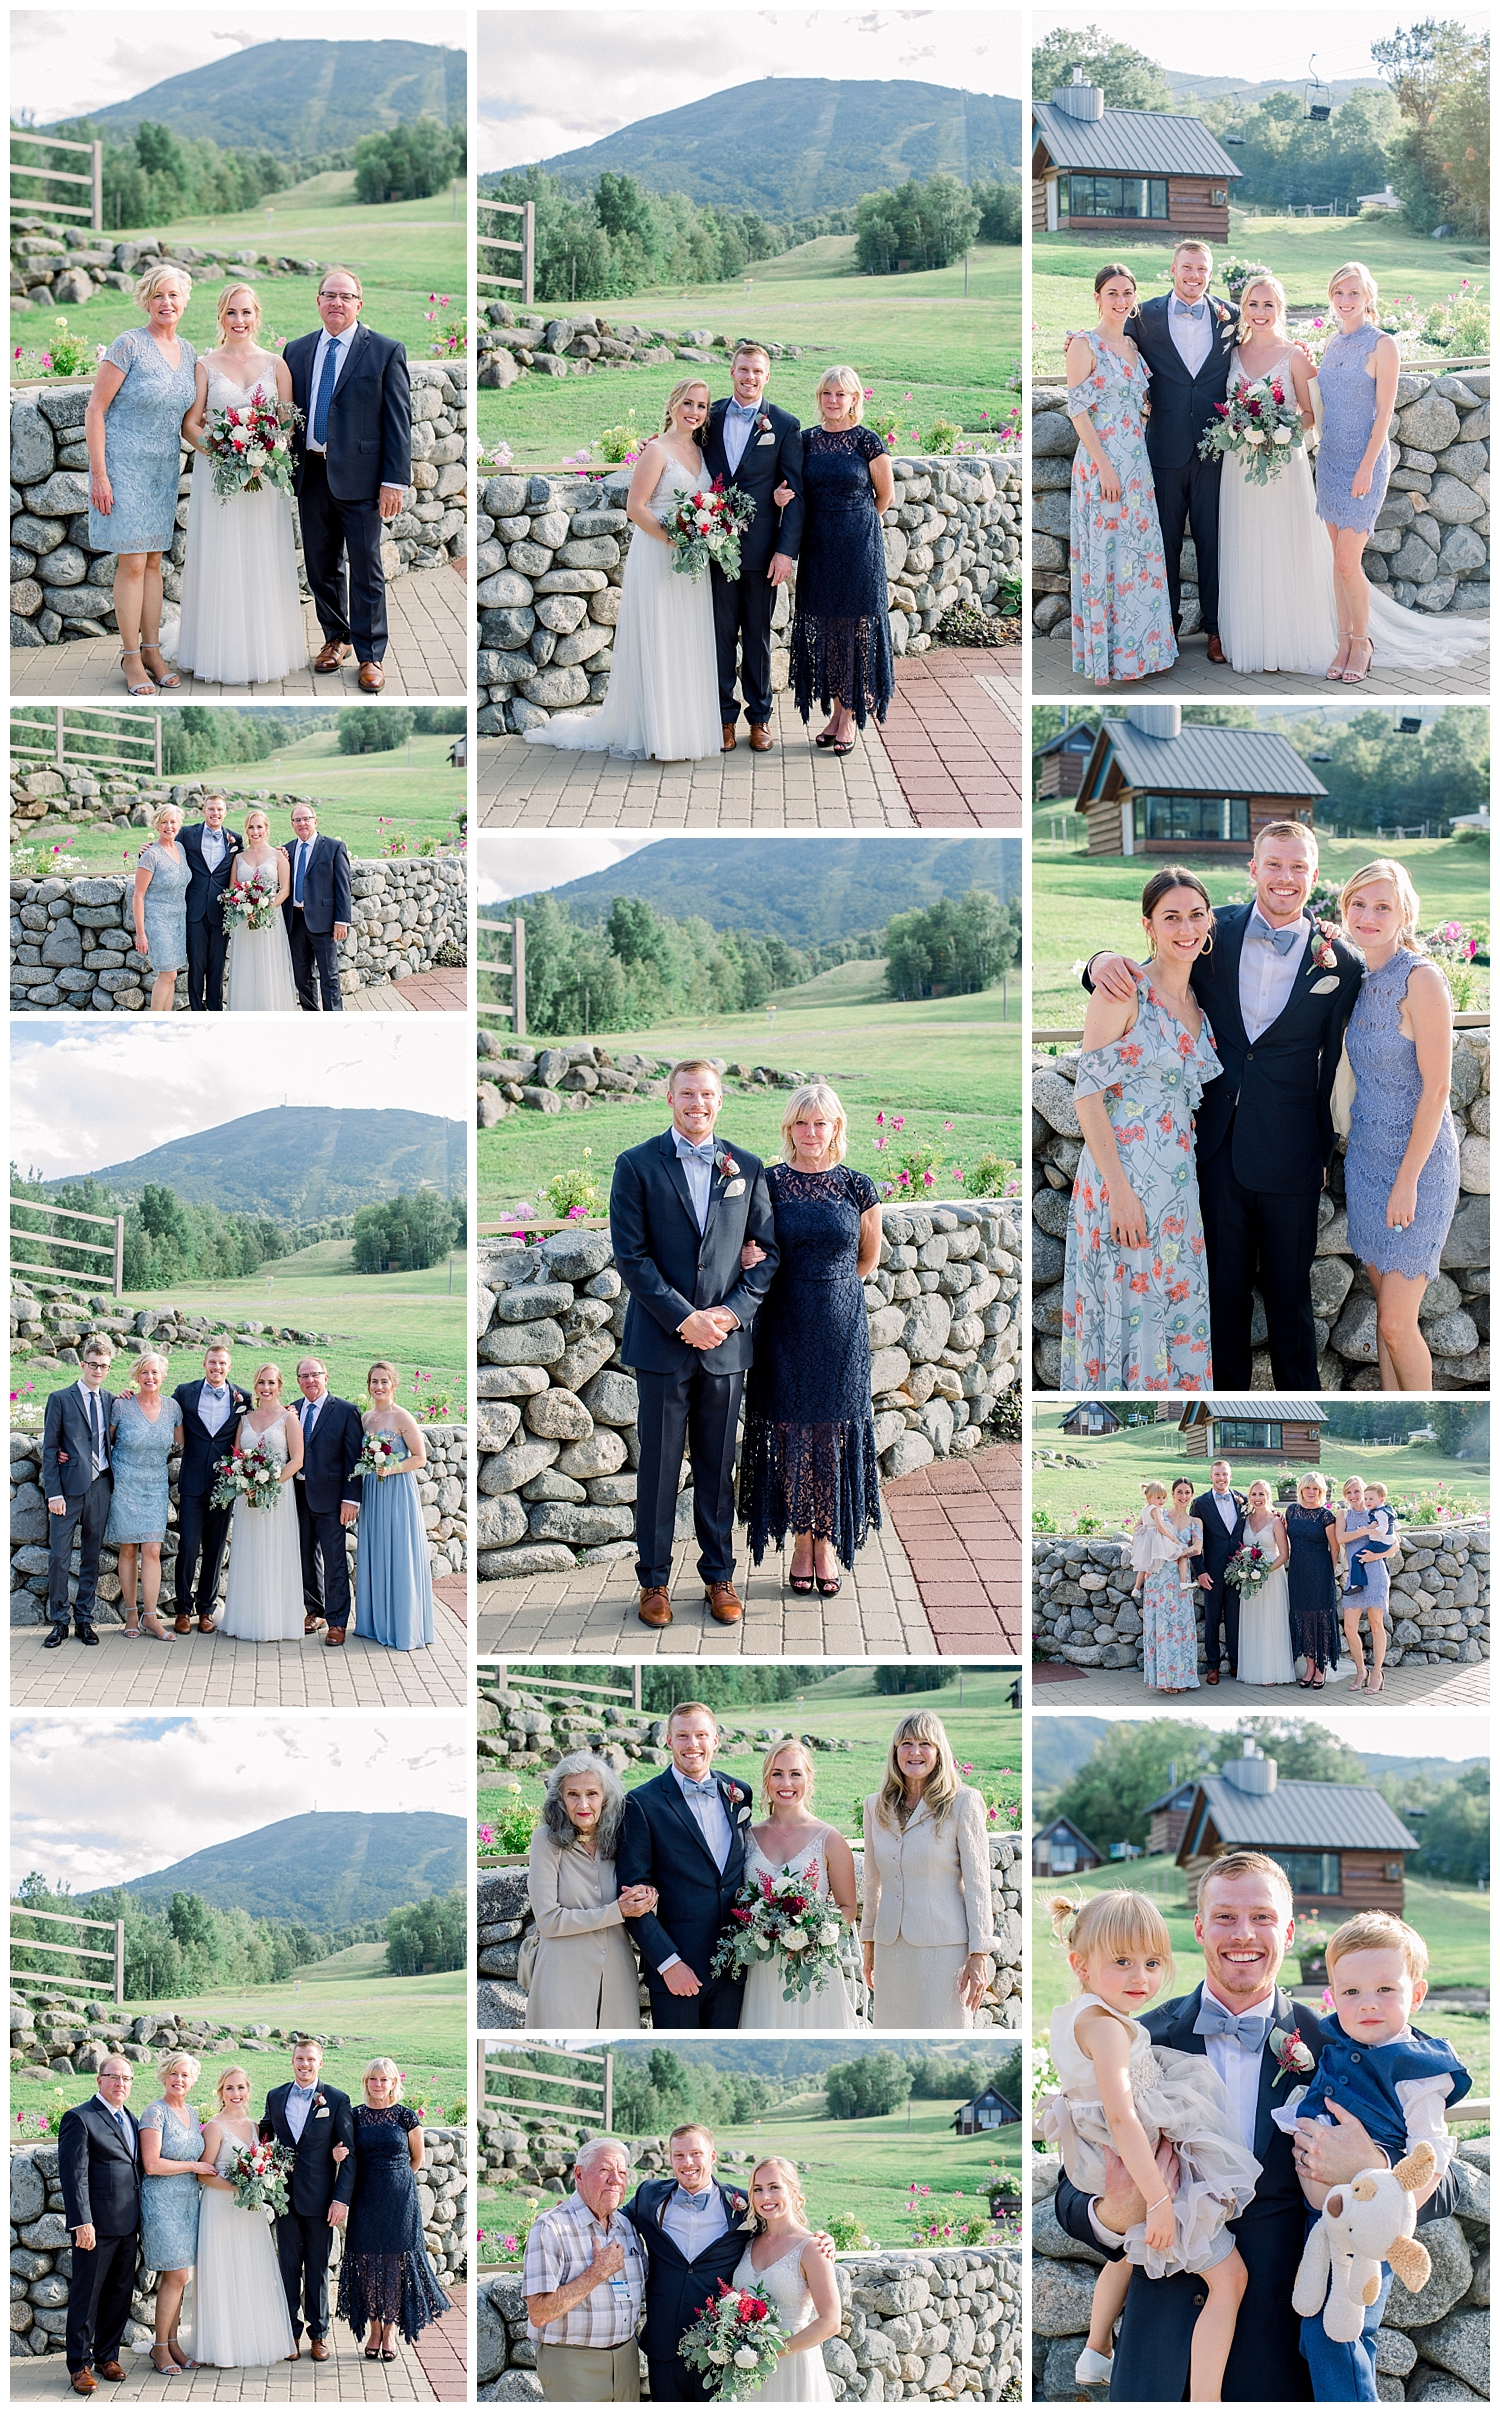 Family photo groups at Sugarloaf Mountain Resort Wedding in Maine, photos by Halie Olszowy.